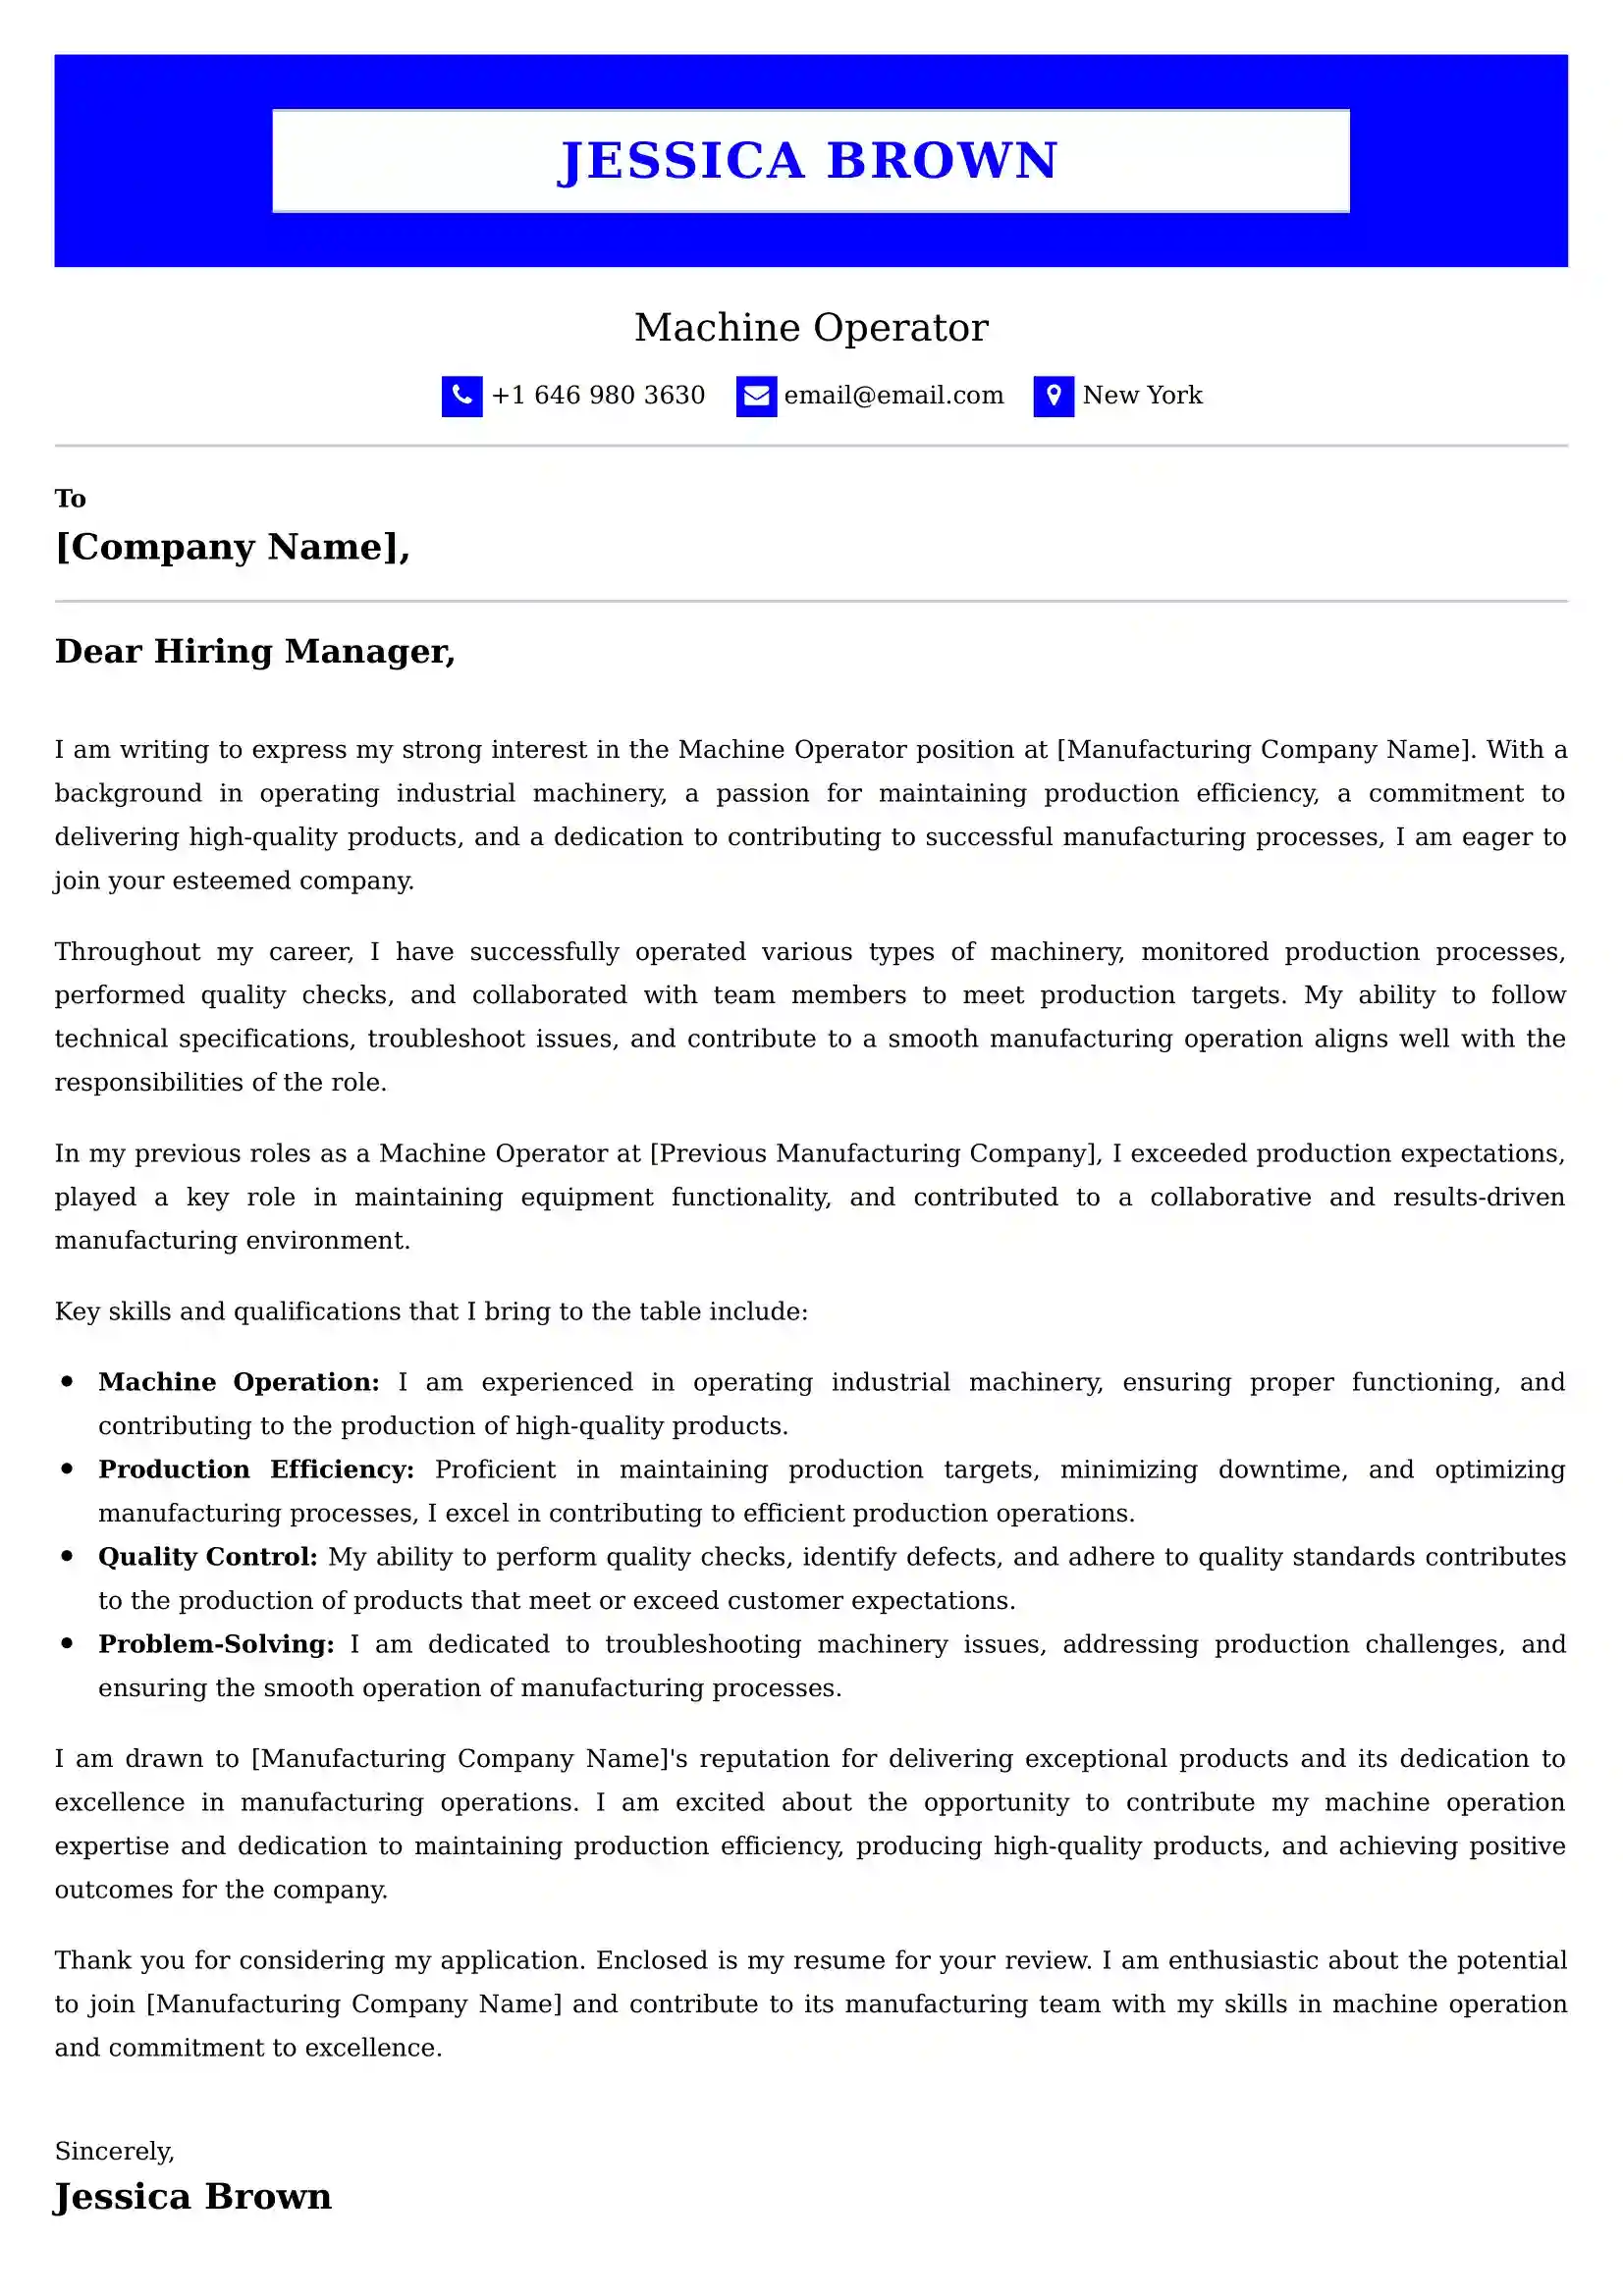 Machine Operator Cover Letter Examples - US Format and Tips